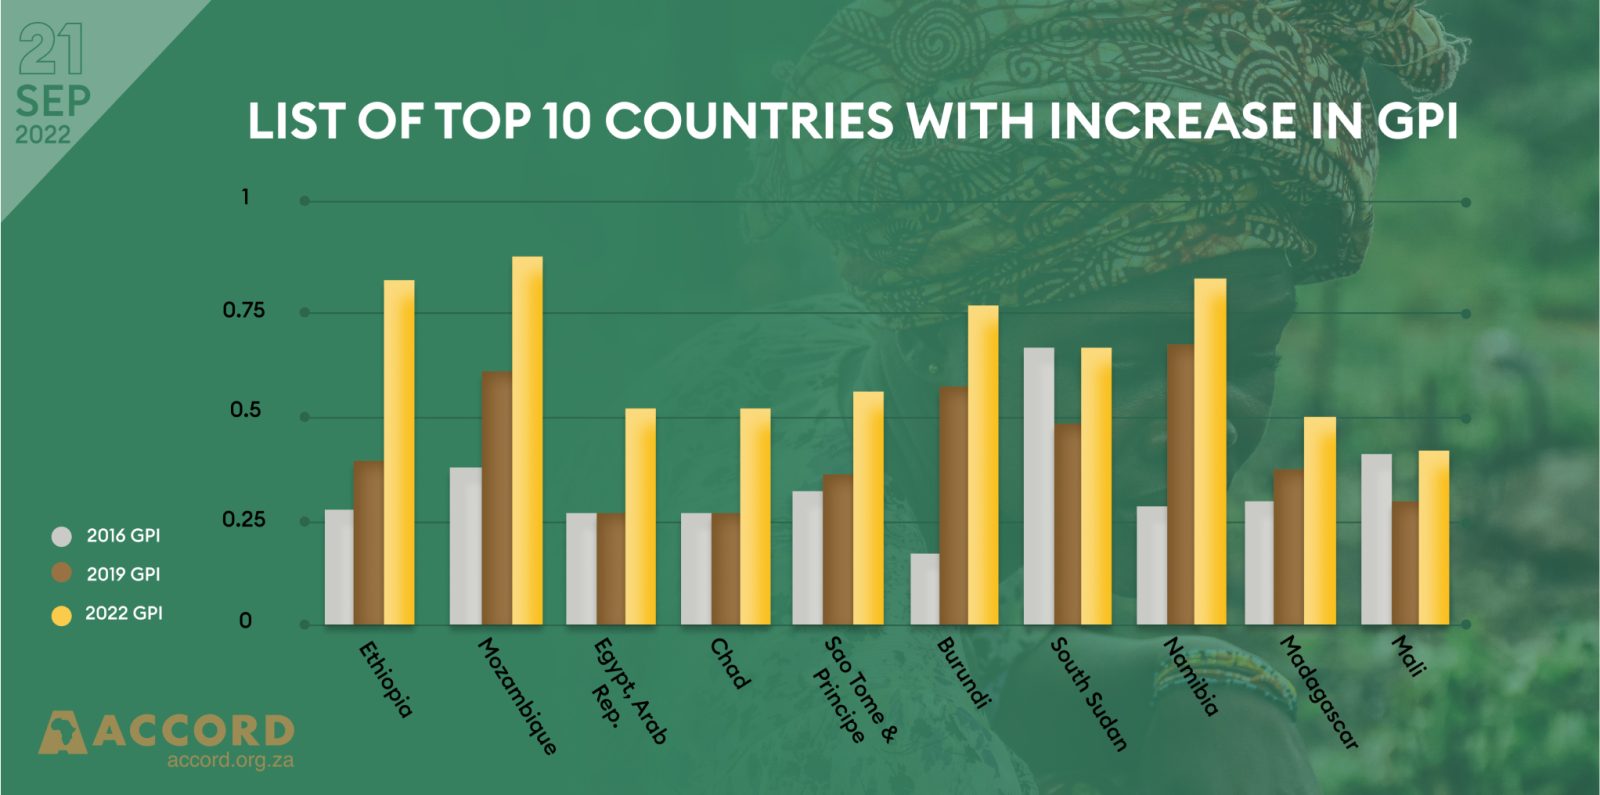 Table 2: List of Top 10 Countries With an Increase in GPI 